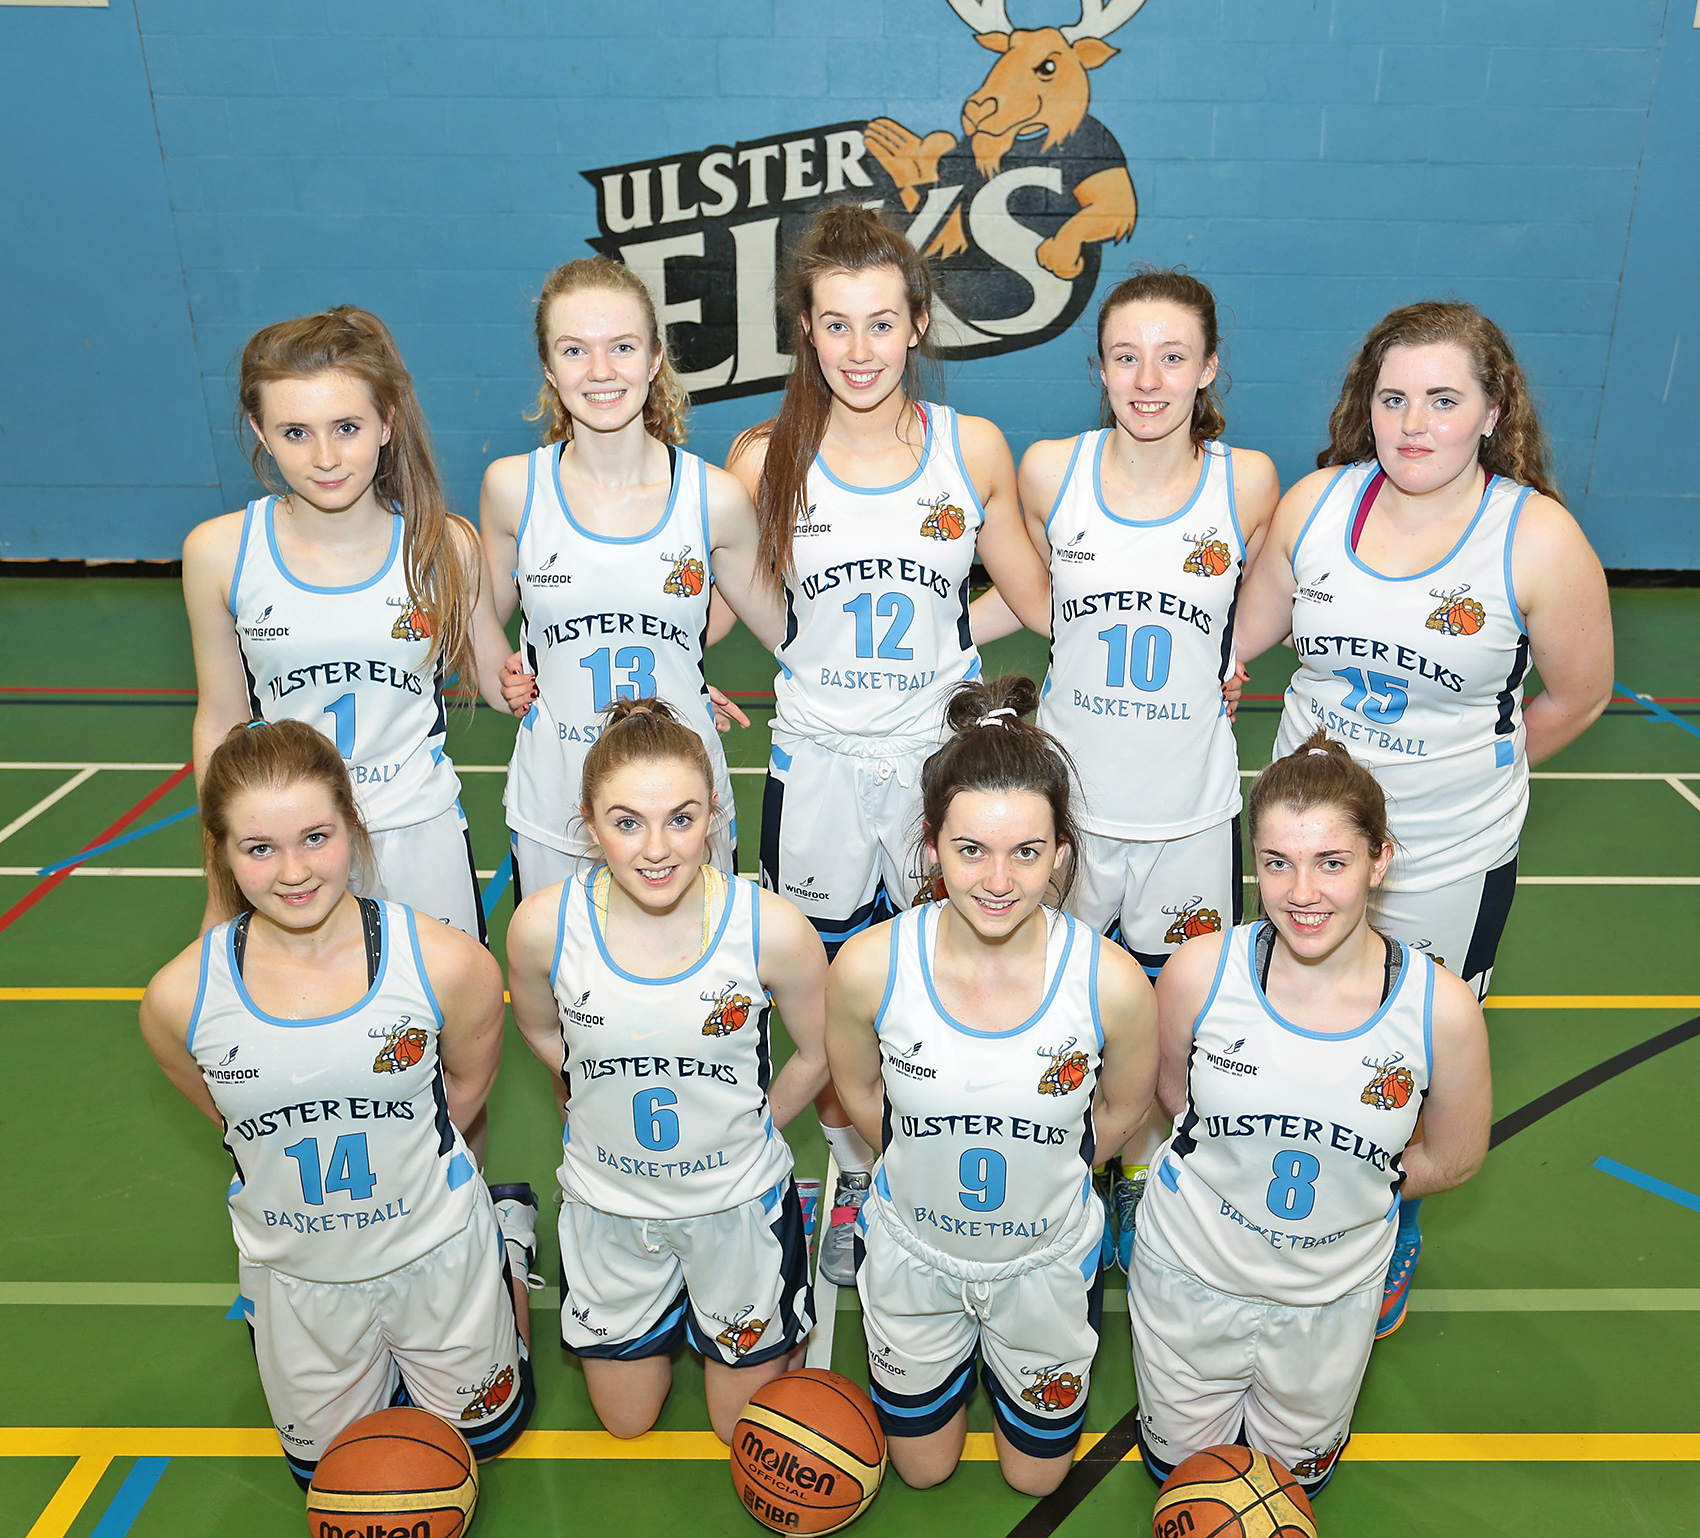  Ulster Elks are the first team from Belfast to compete for the coveted underage title